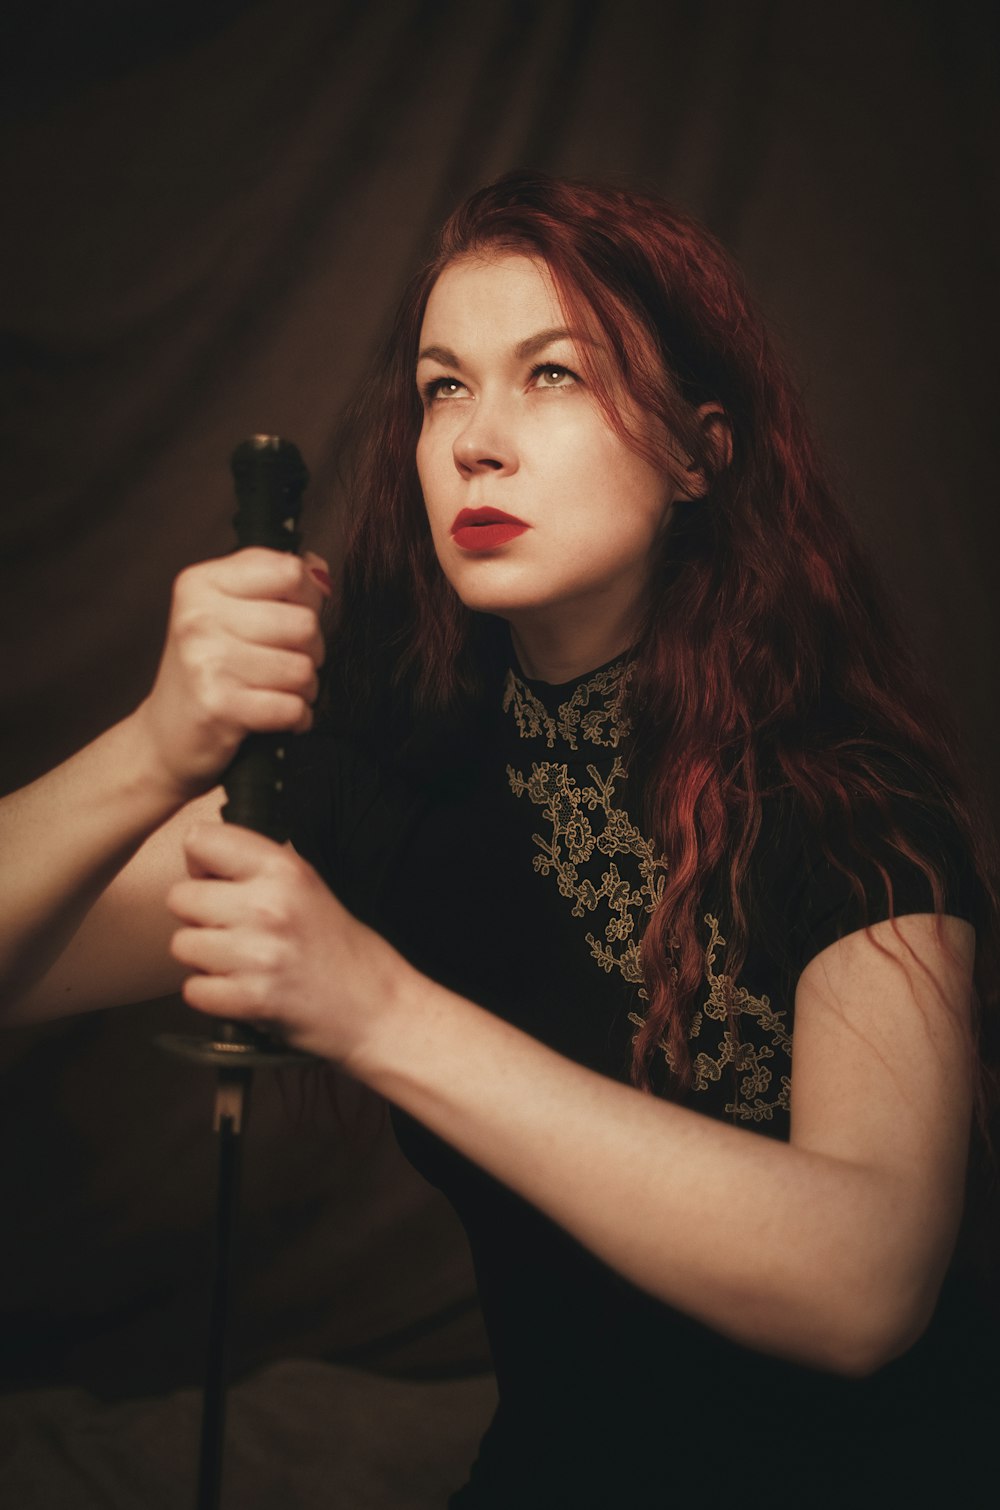 a woman with red hair holding a black umbrella